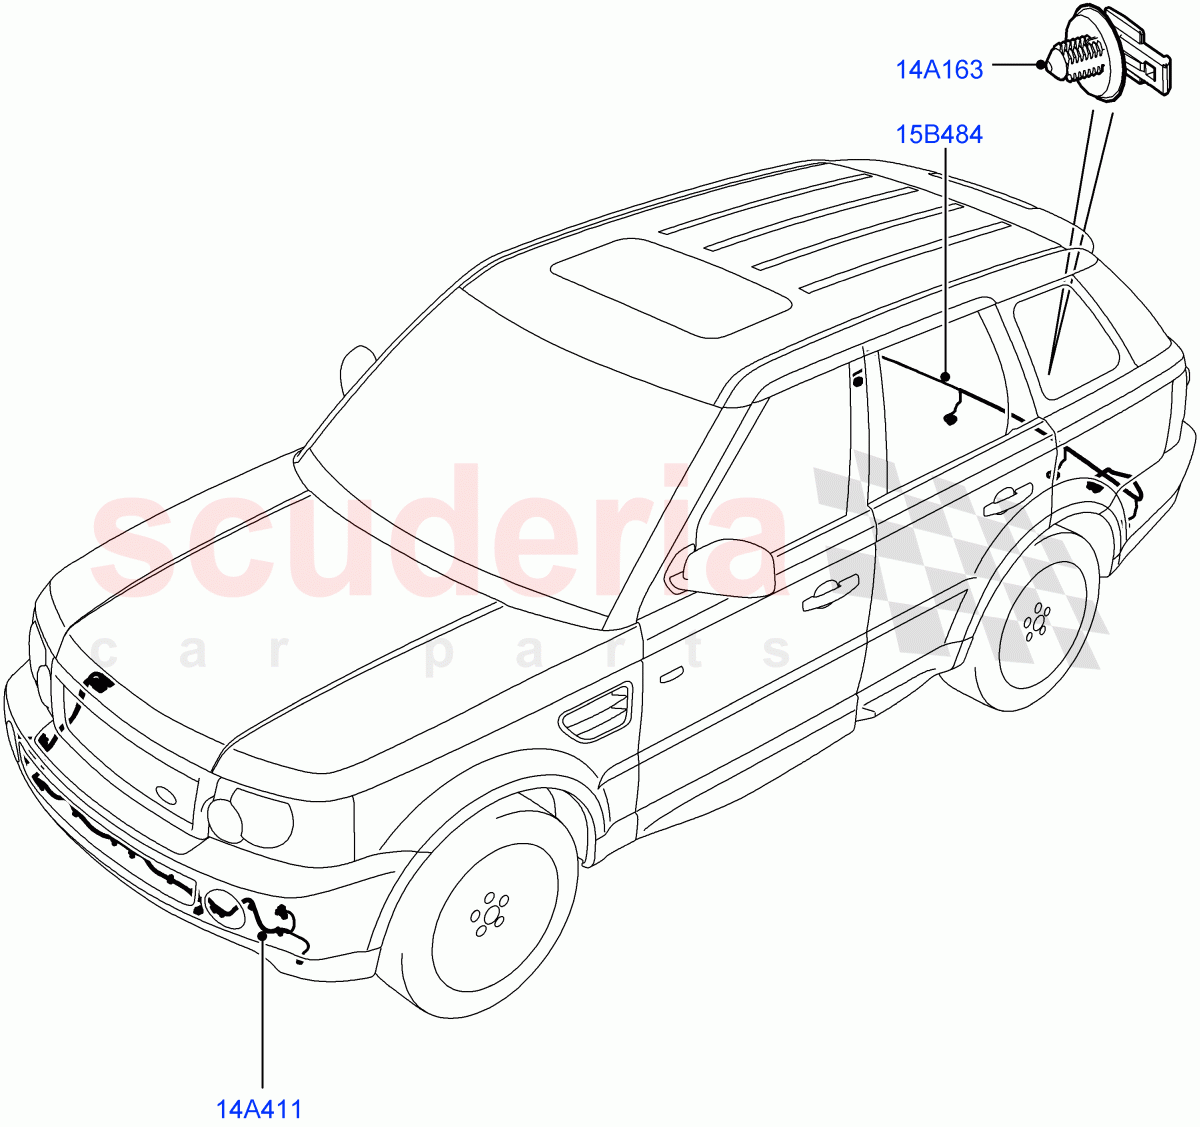 Electrical Wiring - Body And Rear(Bumper)((V)FROMAA000001) of Land Rover Land Rover Range Rover Sport (2010-2013) [5.0 OHC SGDI NA V8 Petrol]